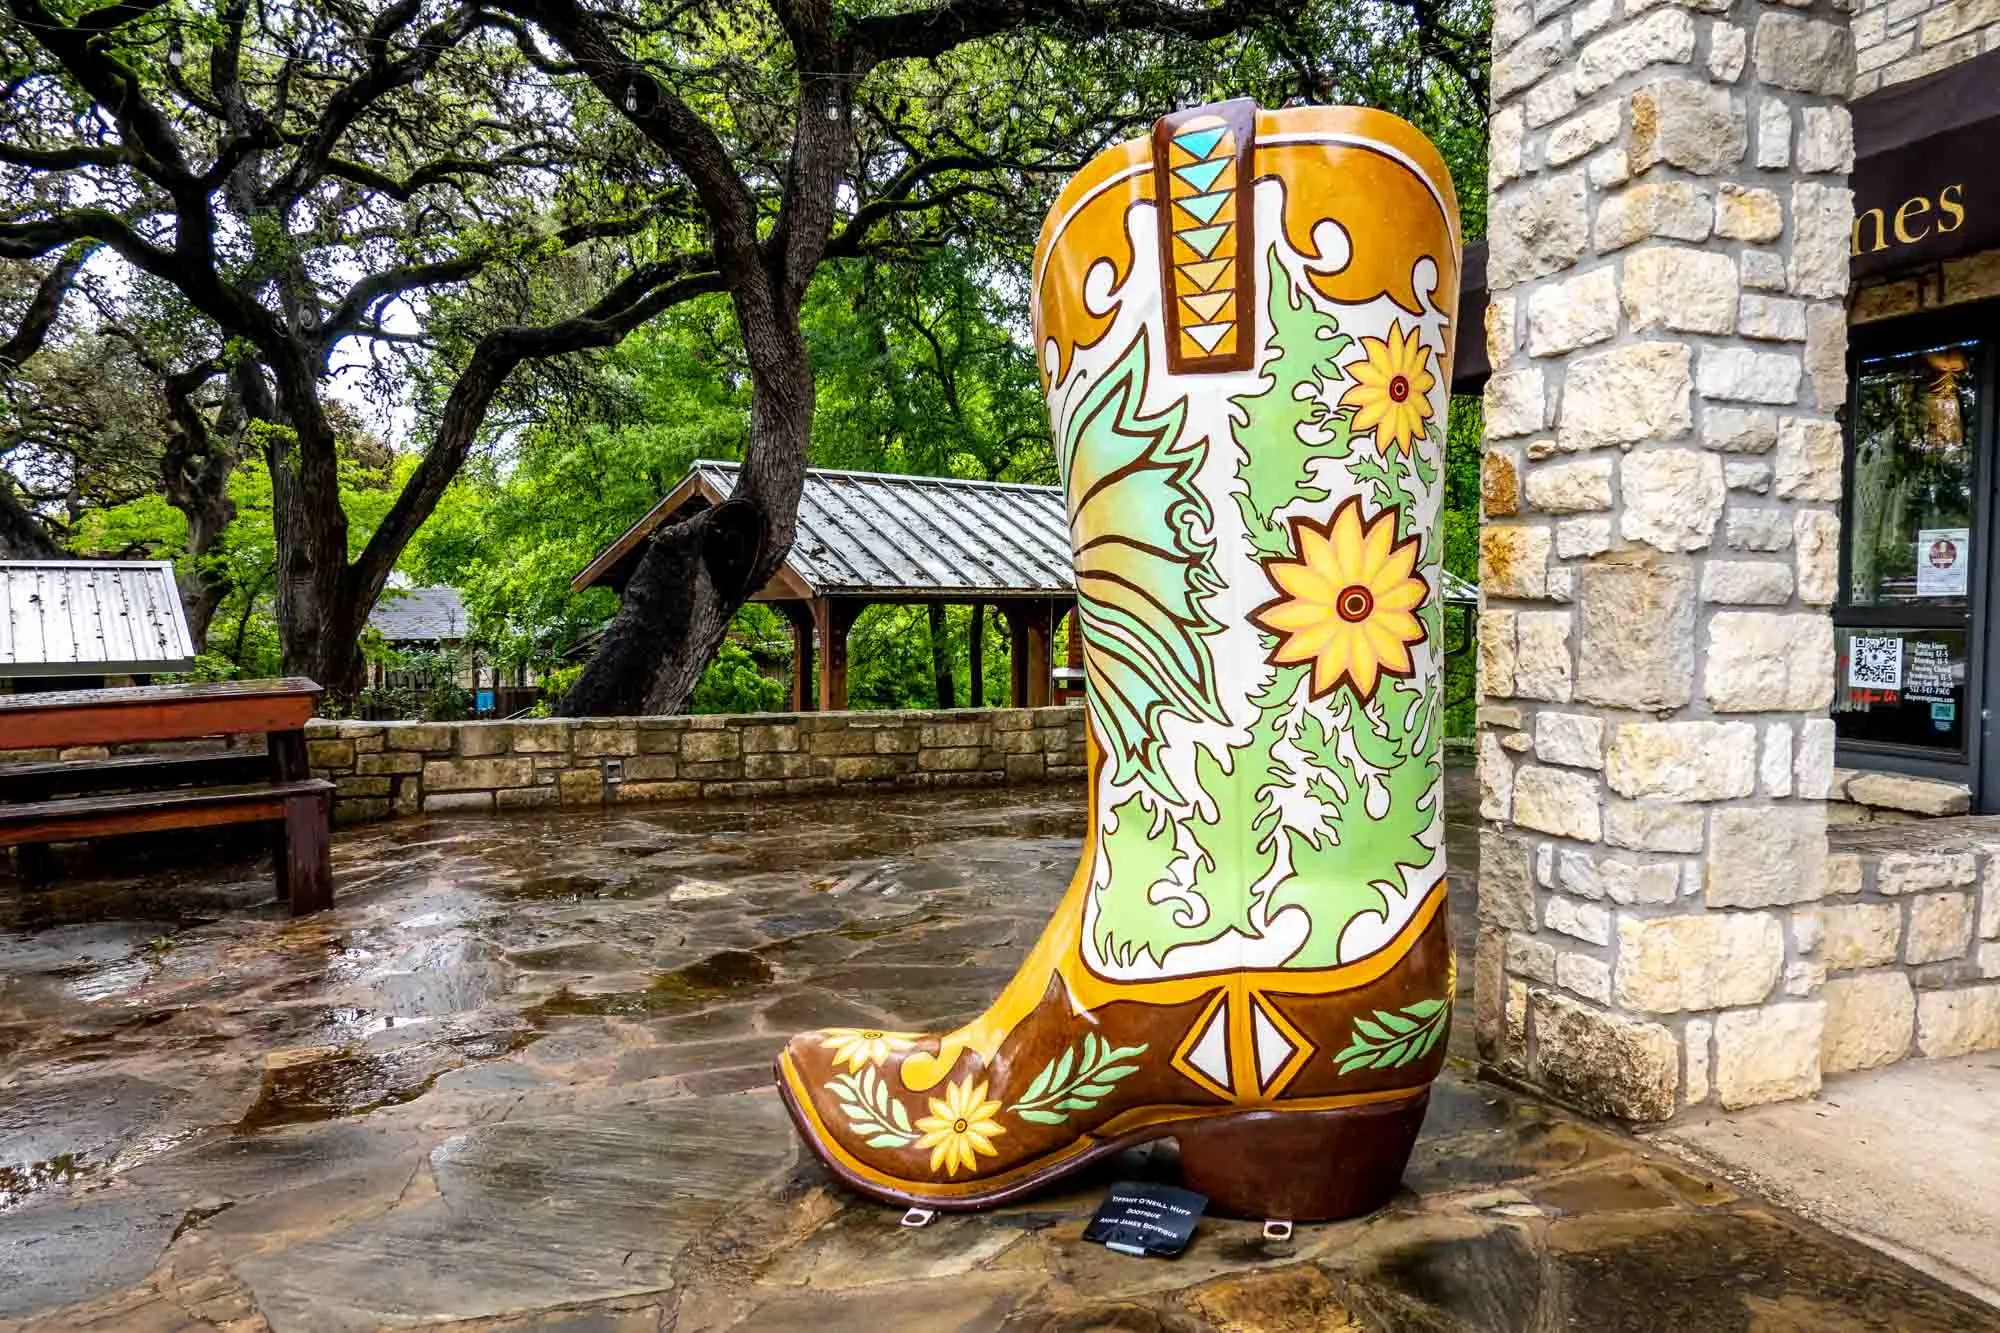 Six-foot-tall cowboy boot painted with yellow flowers and greenery